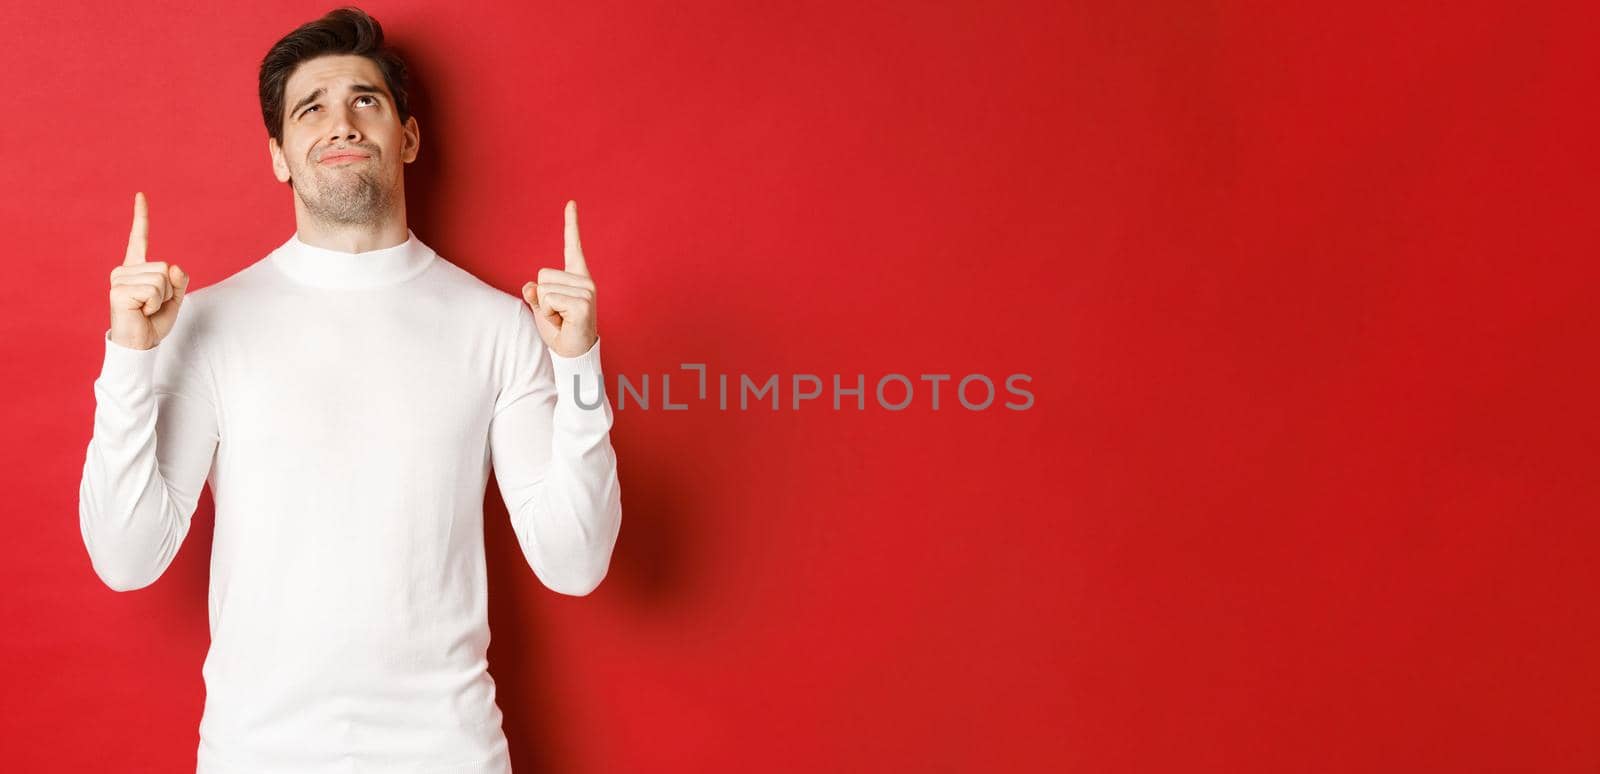 Concept of winter holidays. Doubtful handsome man in white sweater, looking skeptical and pointing fingers up at logo, standing against red background.